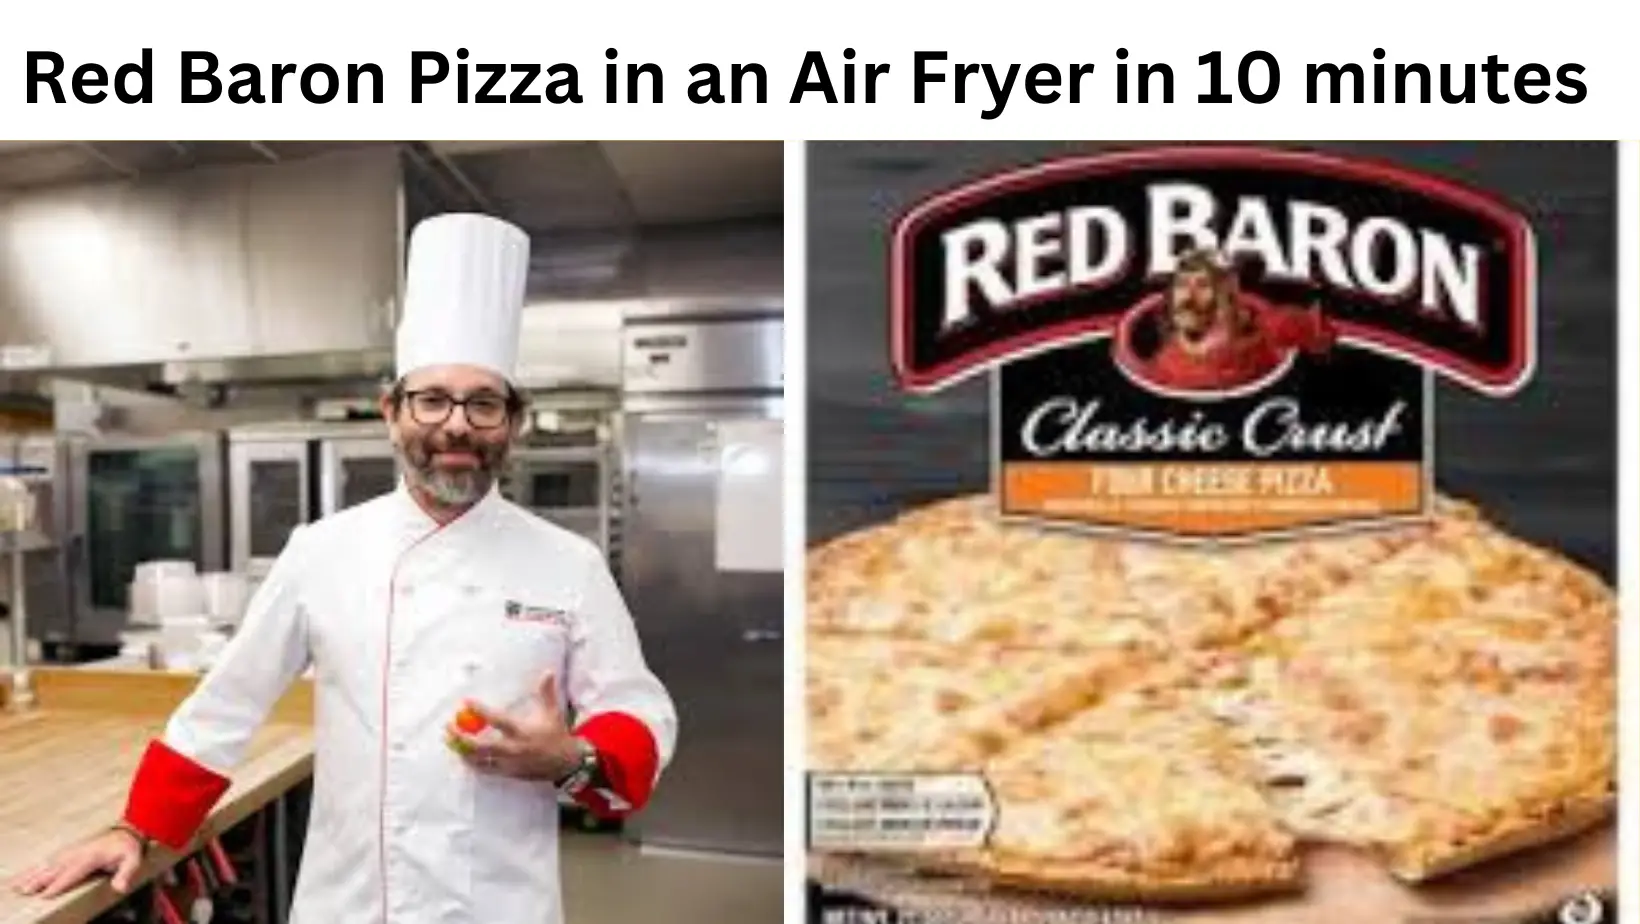 Red Baron Pizza in an Air Fryer in 10 minutes